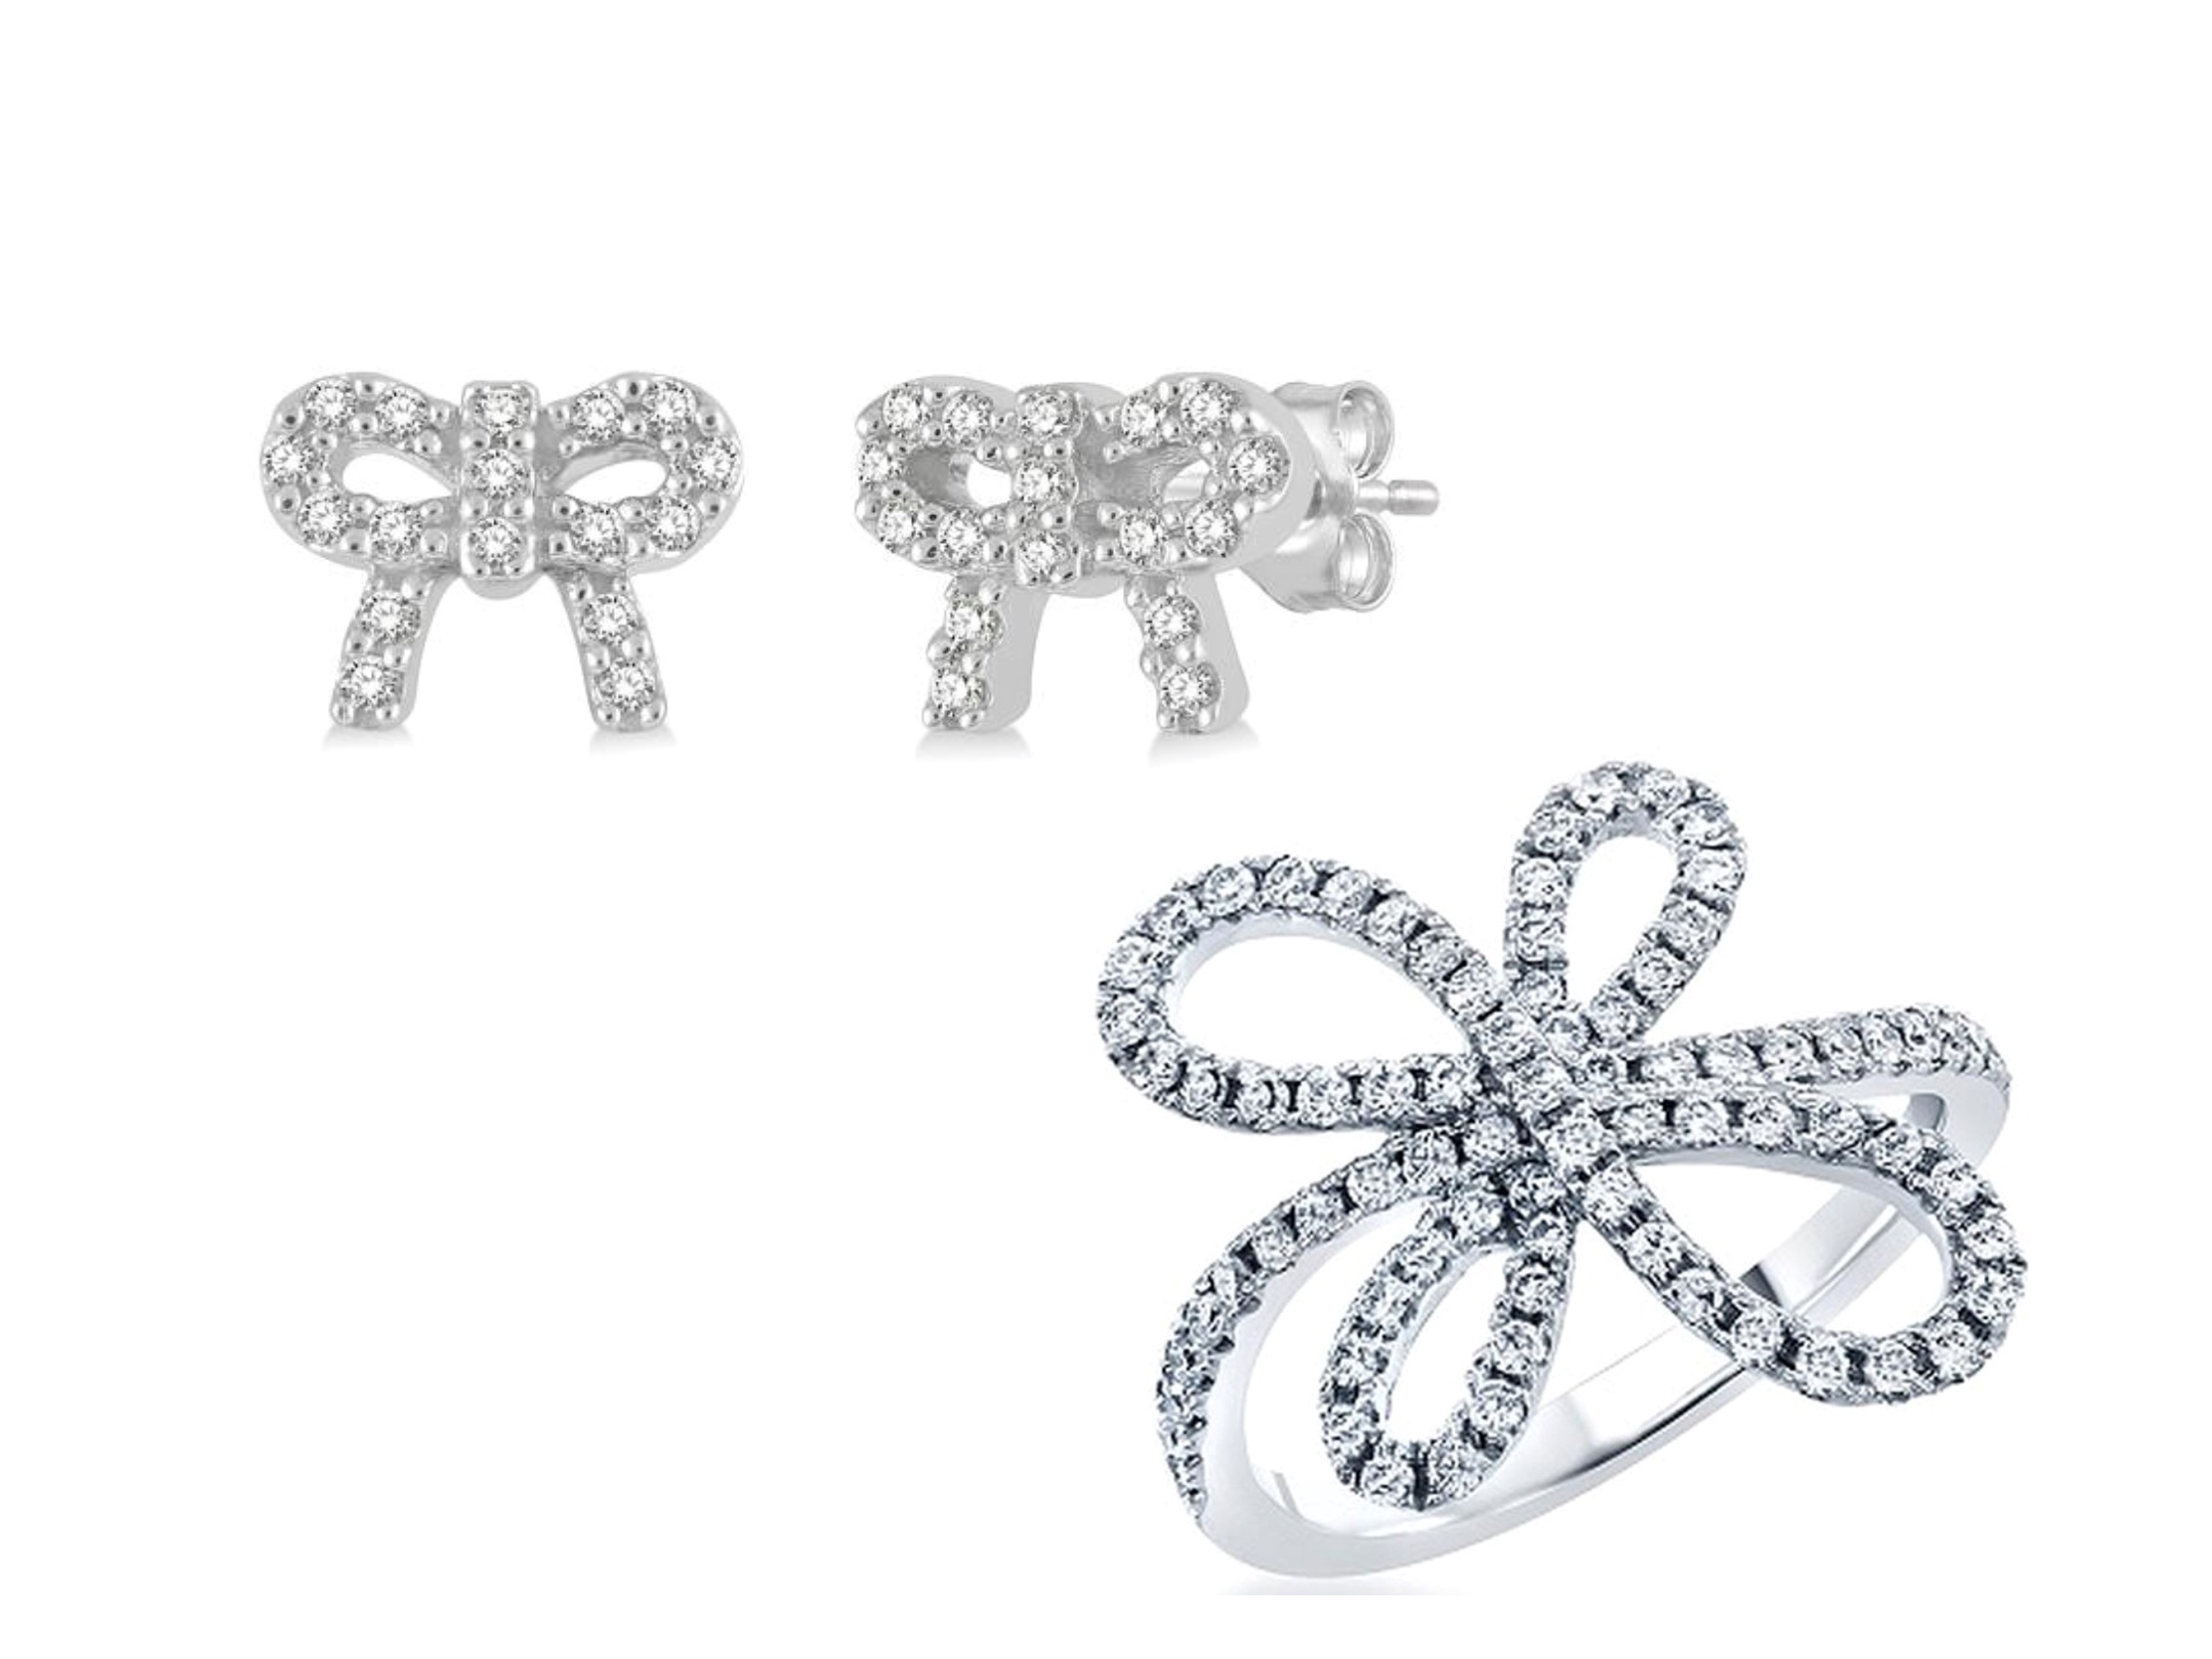 Coquette-inspired Diamond Swirly Bow Ring by Deutsch Fine Jewelry and Bow Petite Diamond Fashion Earrings by Ashi — both available at Deutsch Fine Jewelry in Houston, Texas.